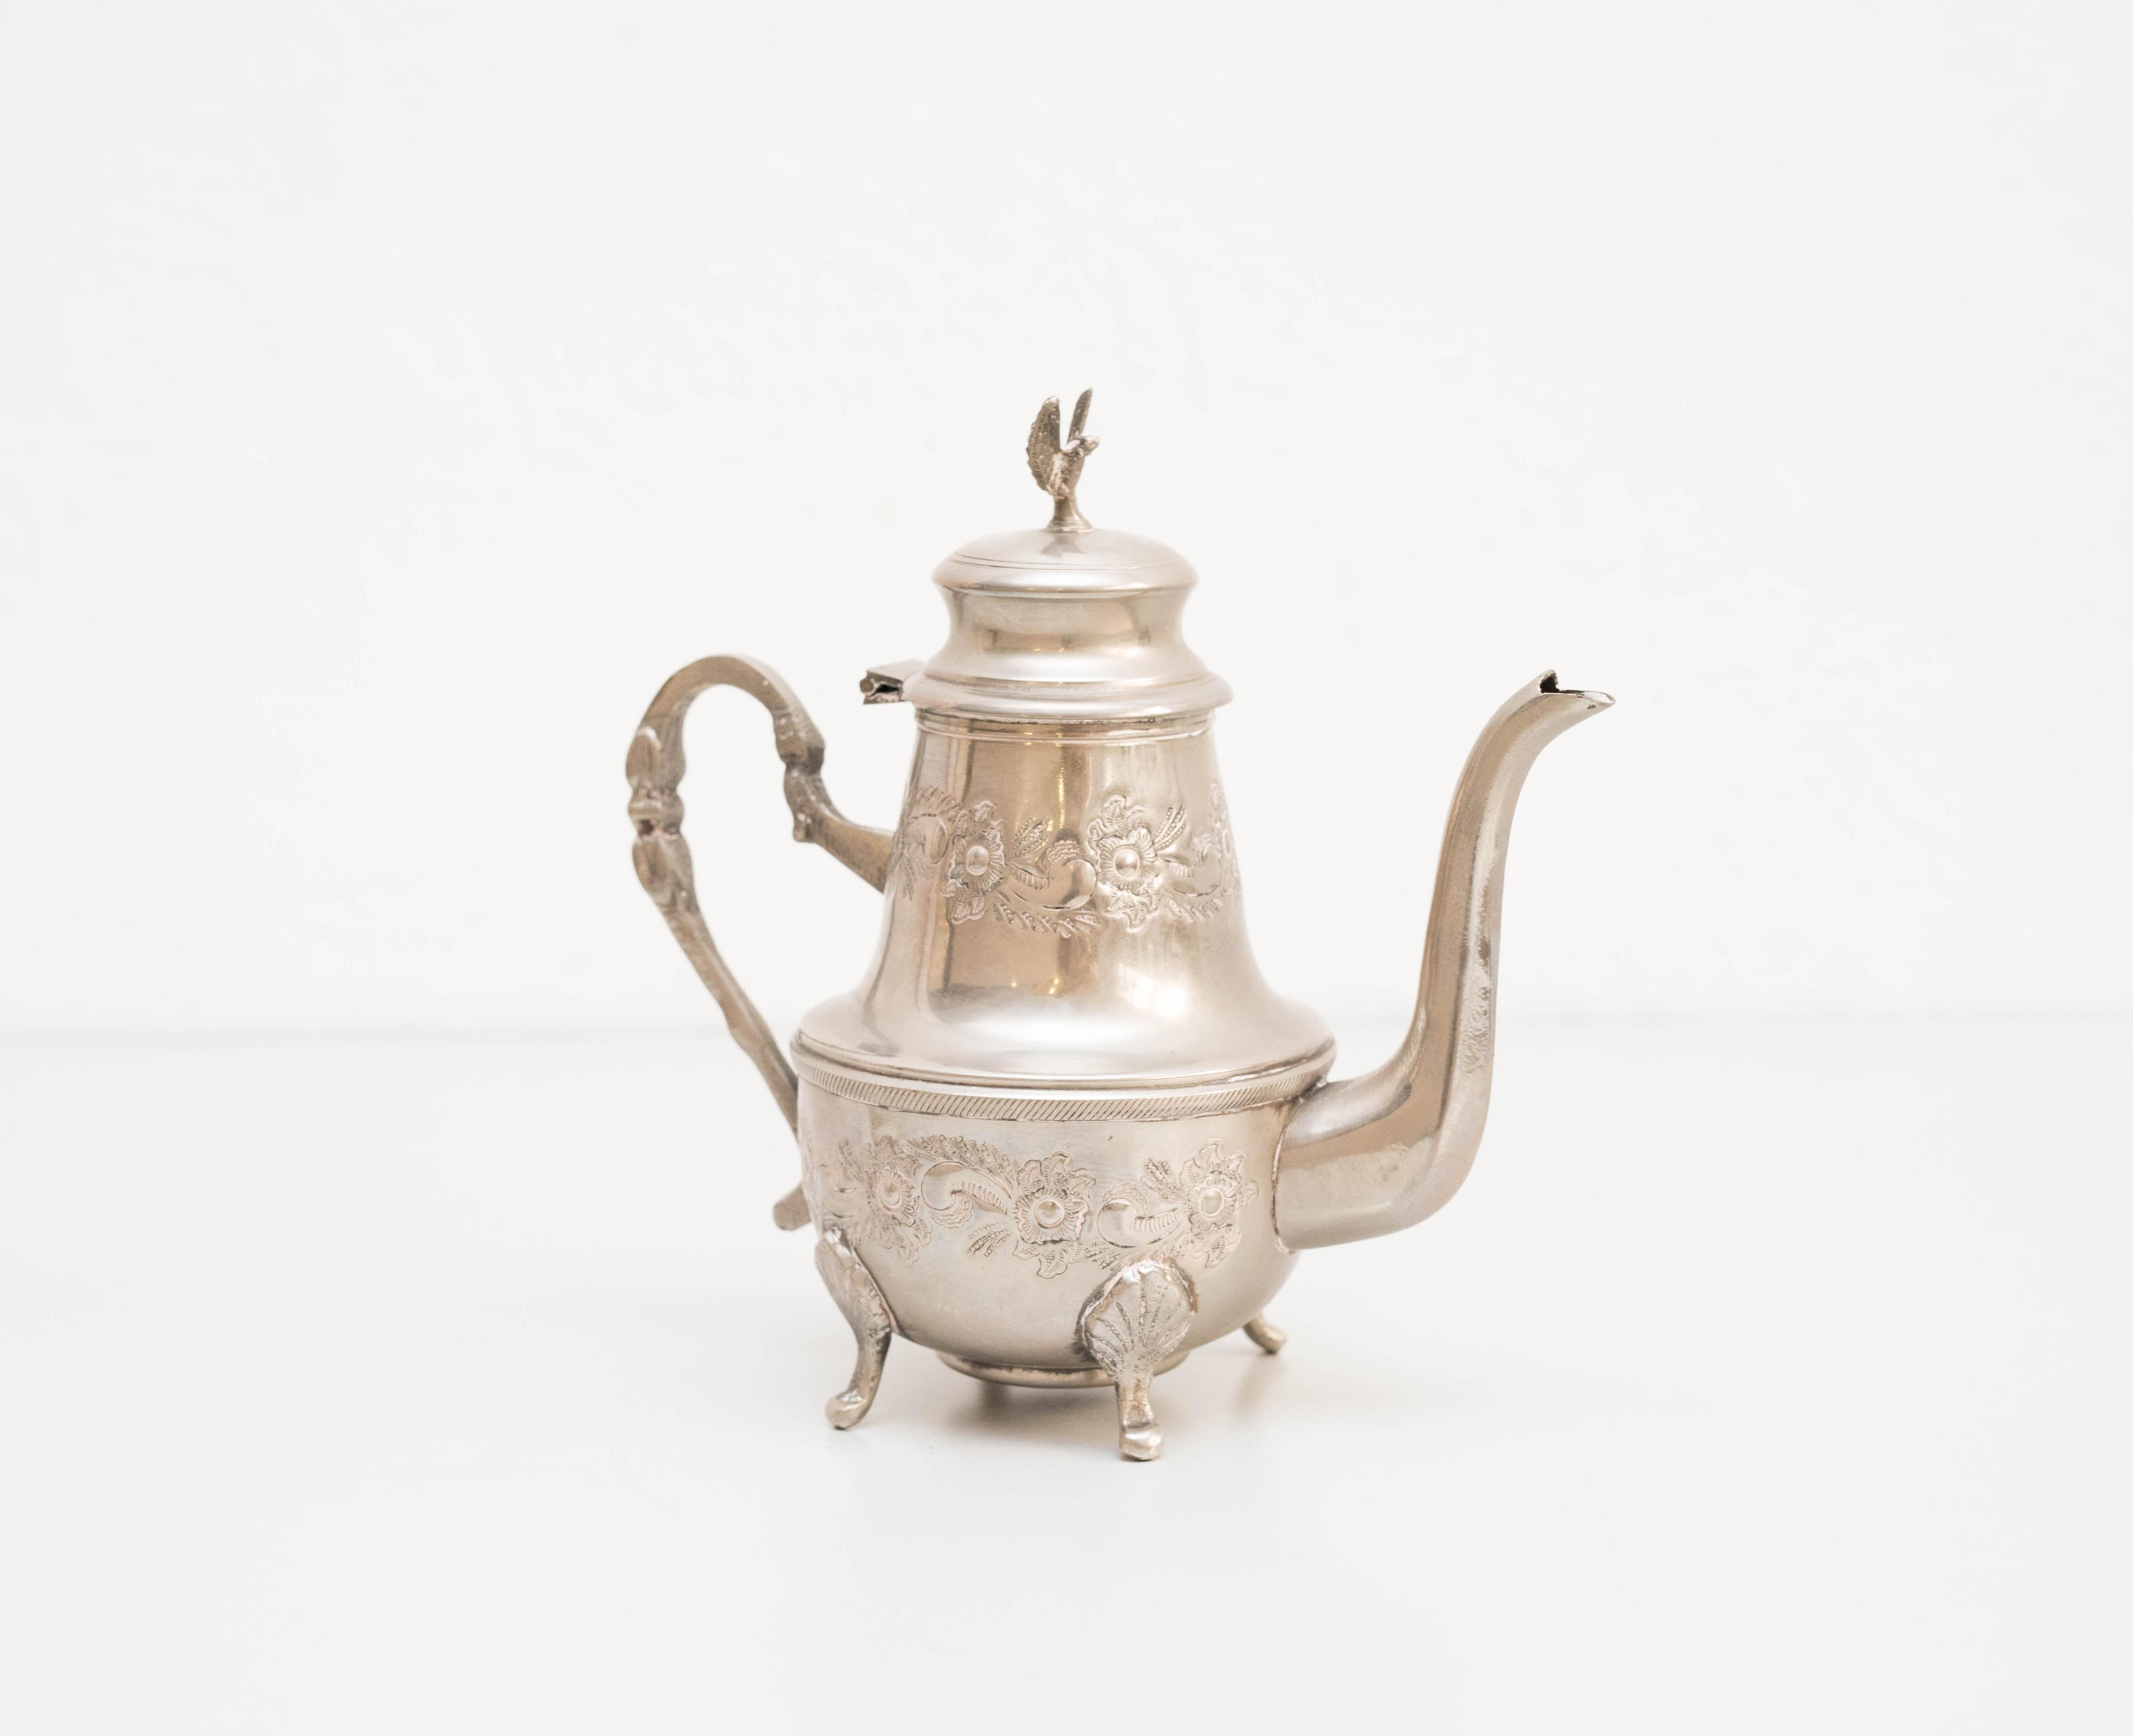 20th century brass teapot.
By unknown manufacturer, Spain.

In original condition, with minor wear consistent with age and use, preserving a beautiful patina.

Materials:
Brass

Dimensions:
D 10 cm x W 23 cm x H 21 cm.